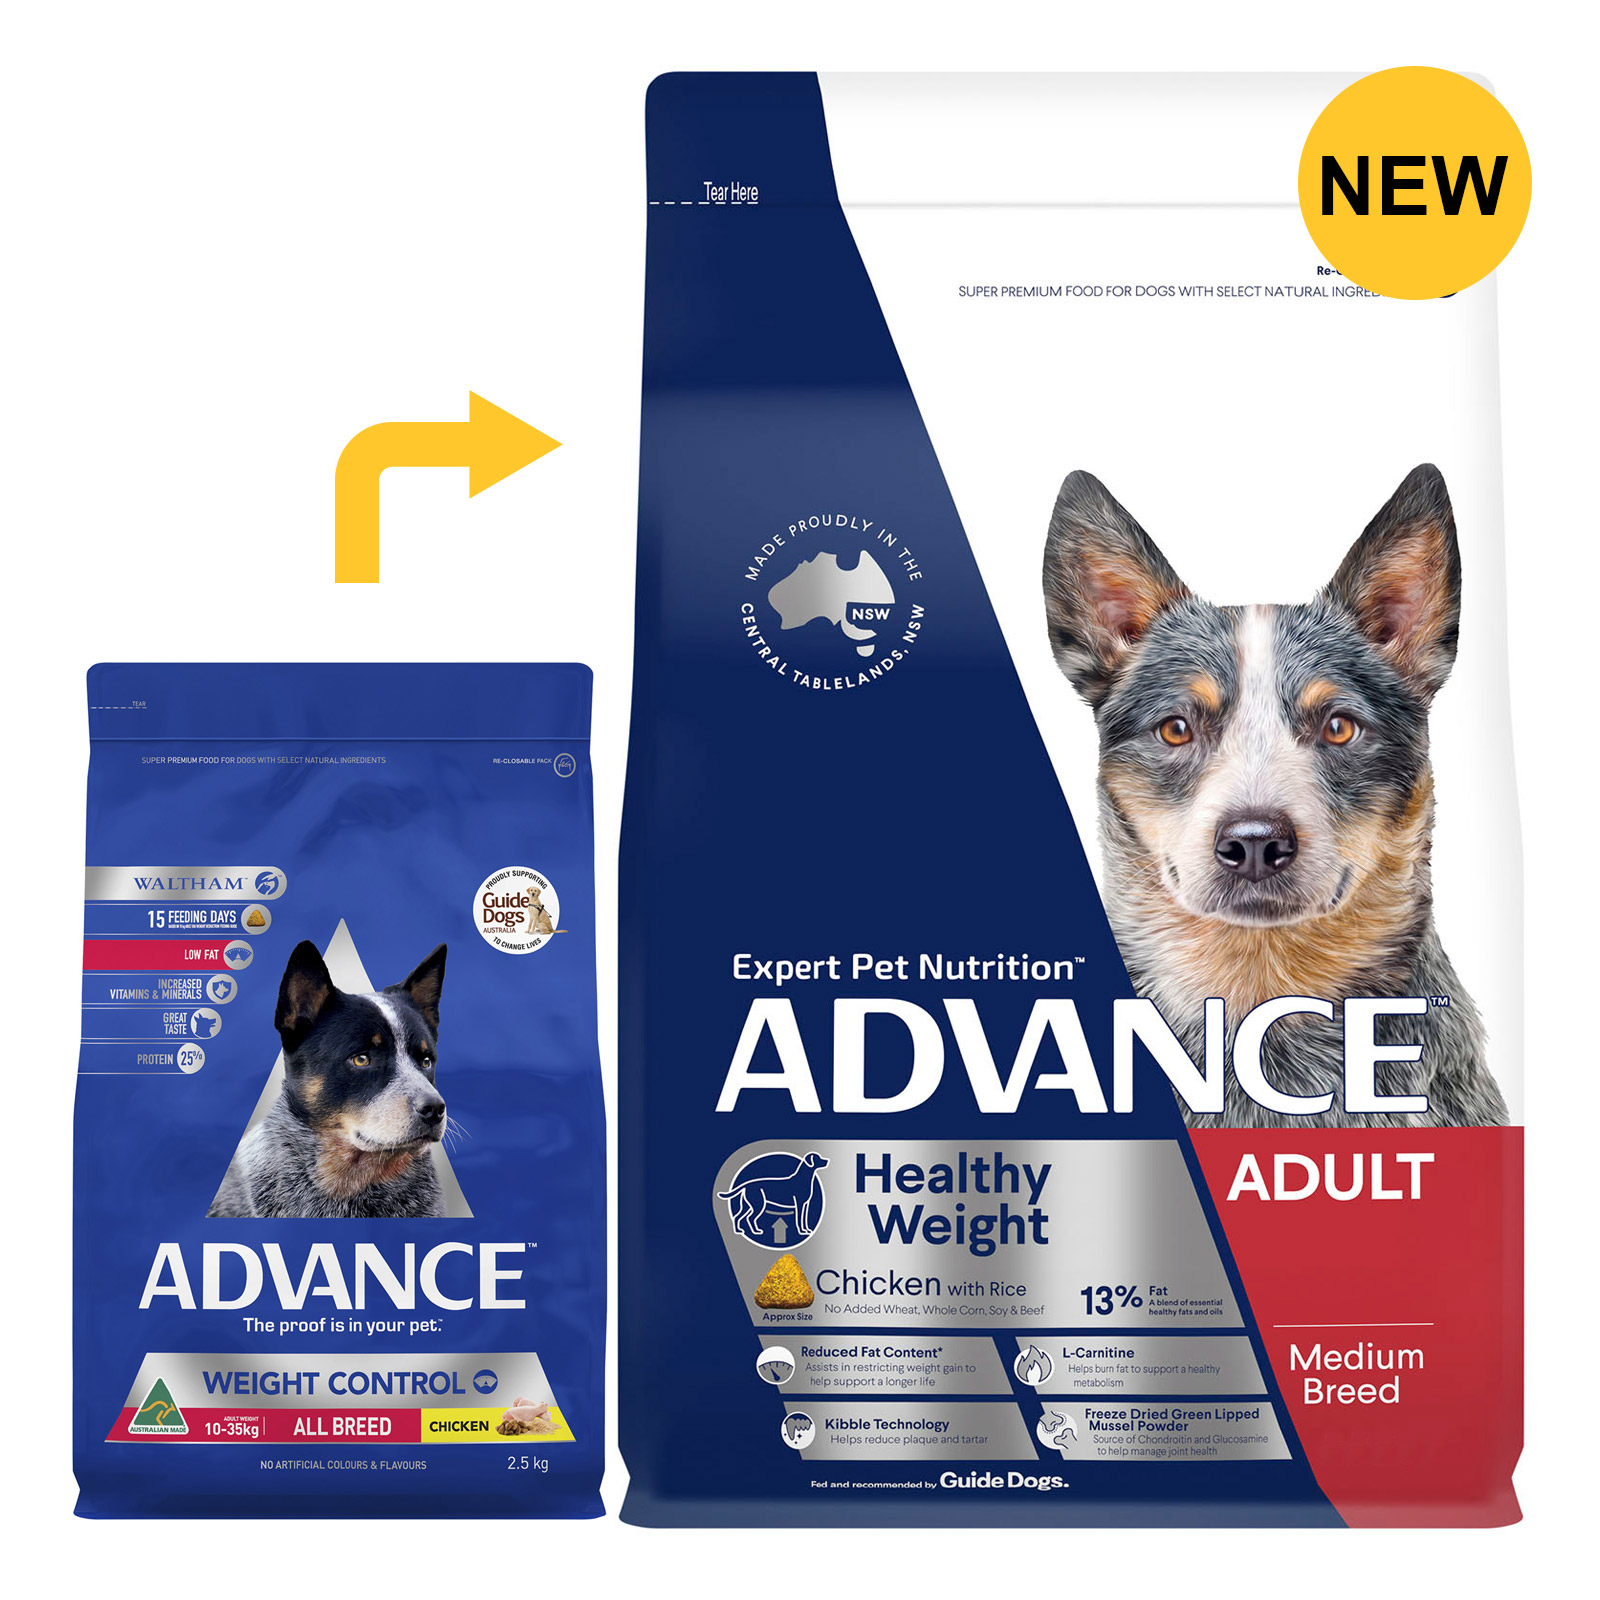 Advance Dog Food Adult Weight Control with Chicken for Food